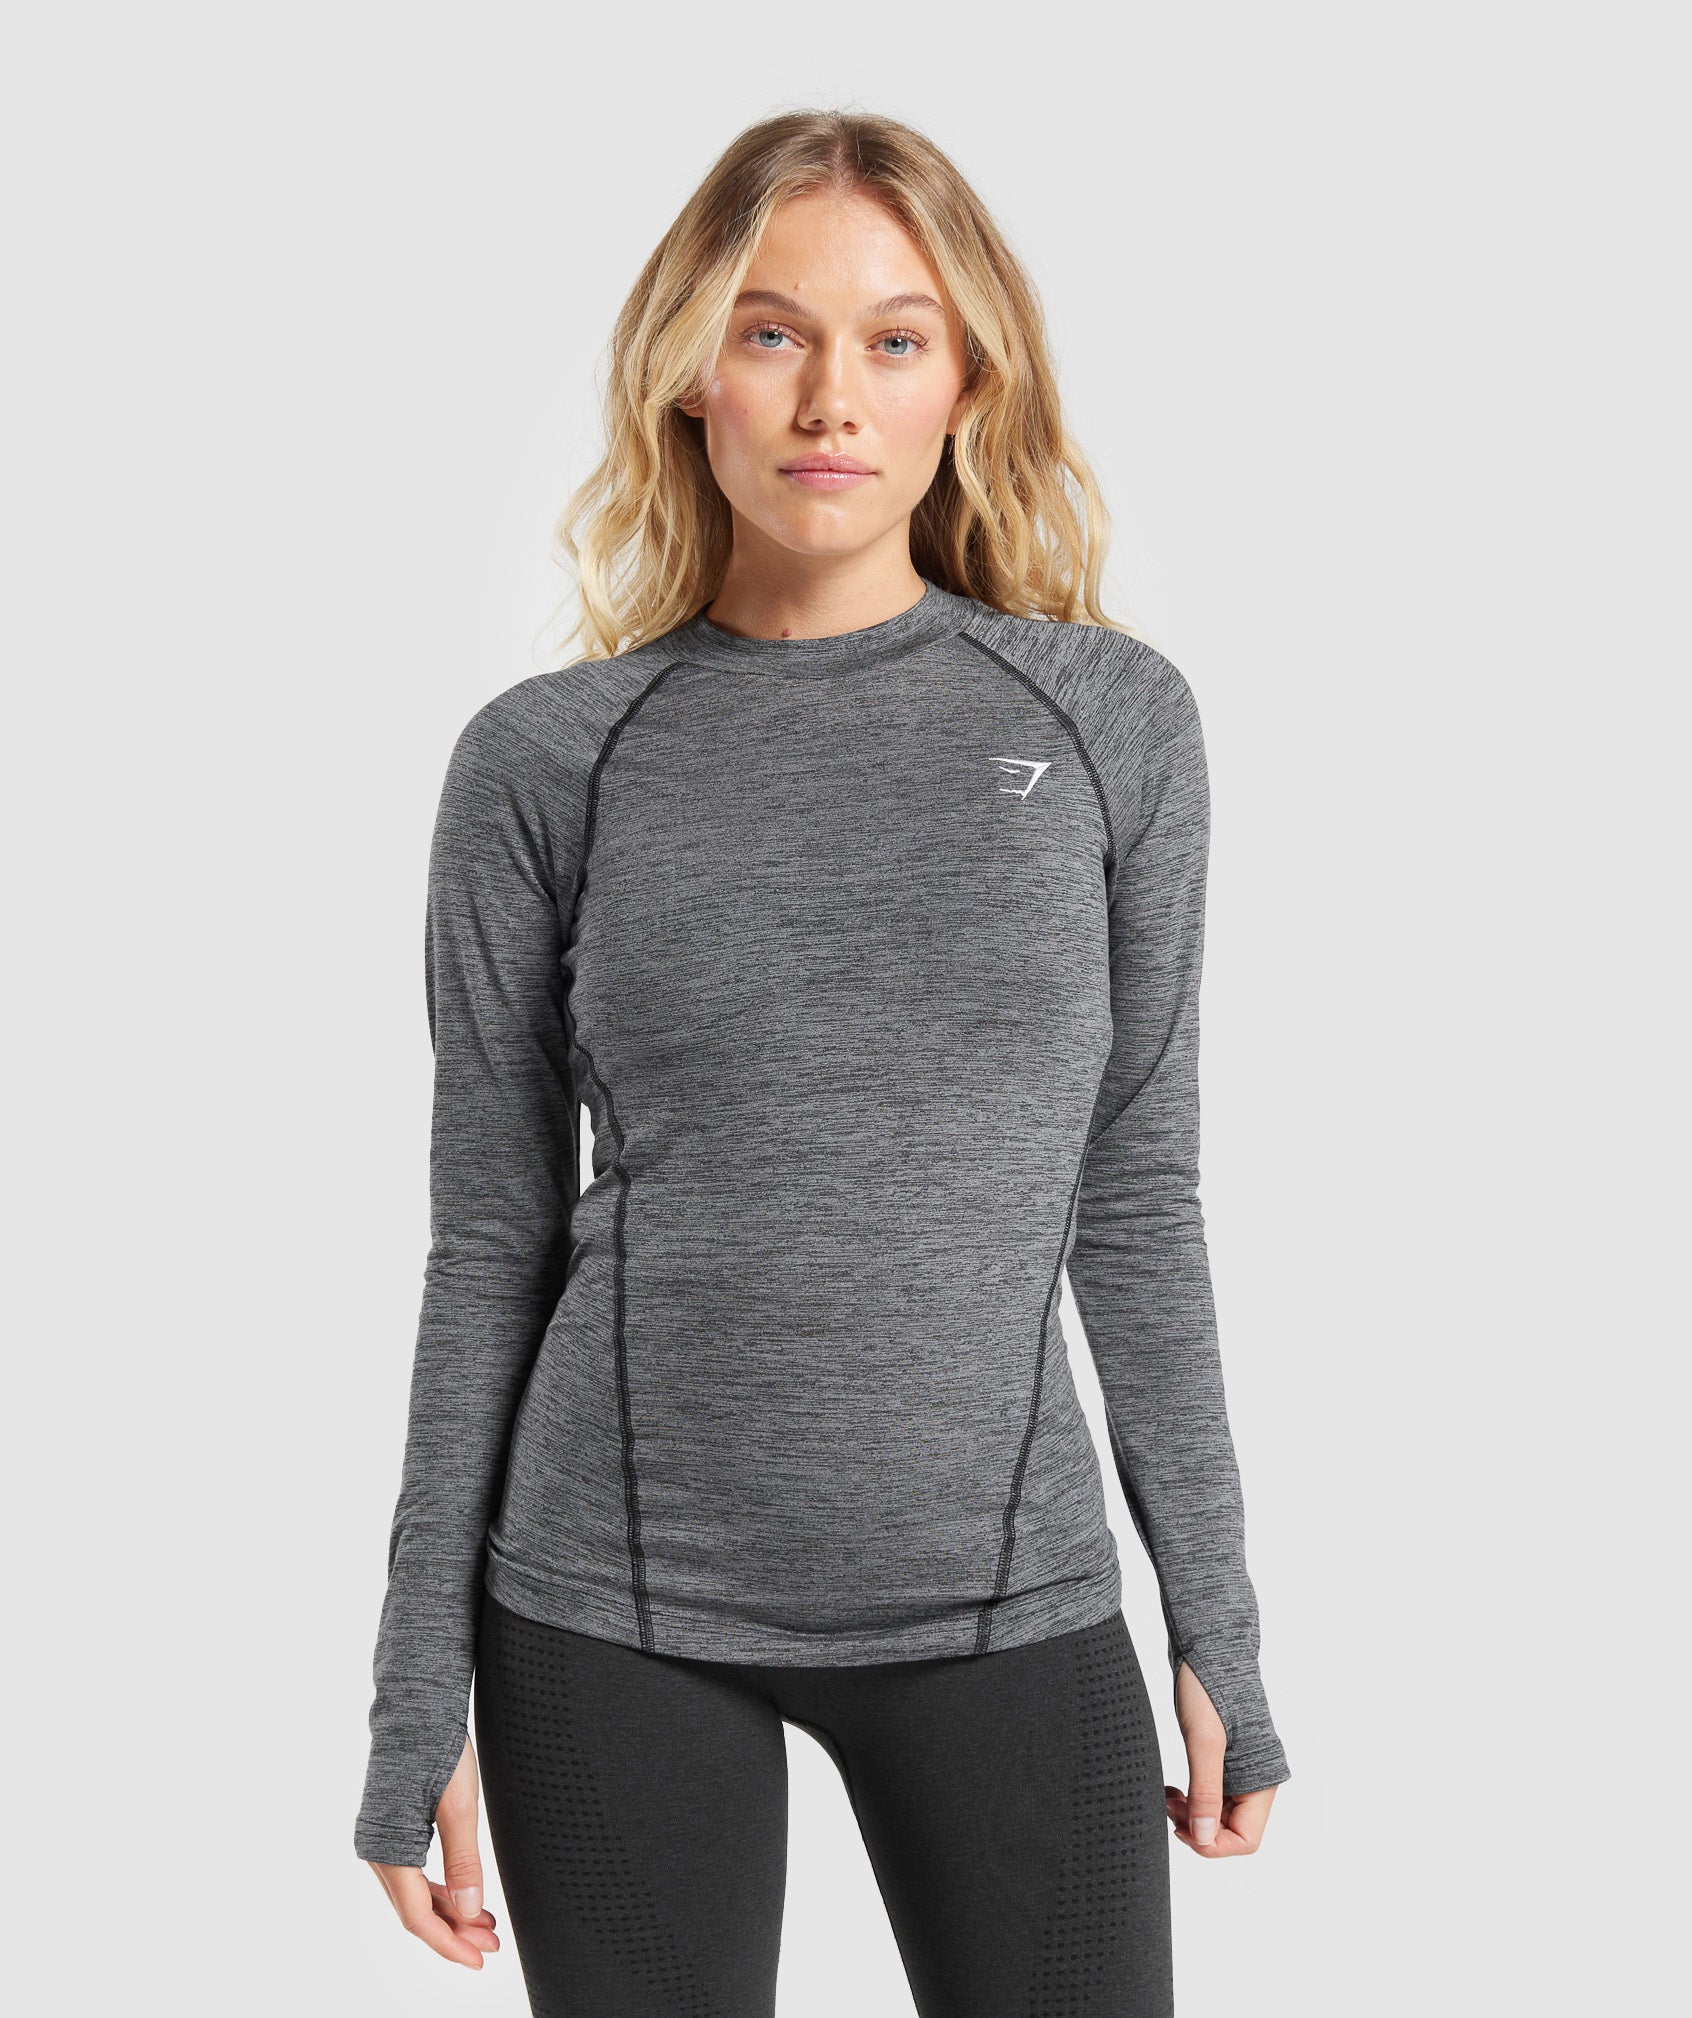 Fleece Lined Long Sleeve Top in Black/Pitch Grey - view 1